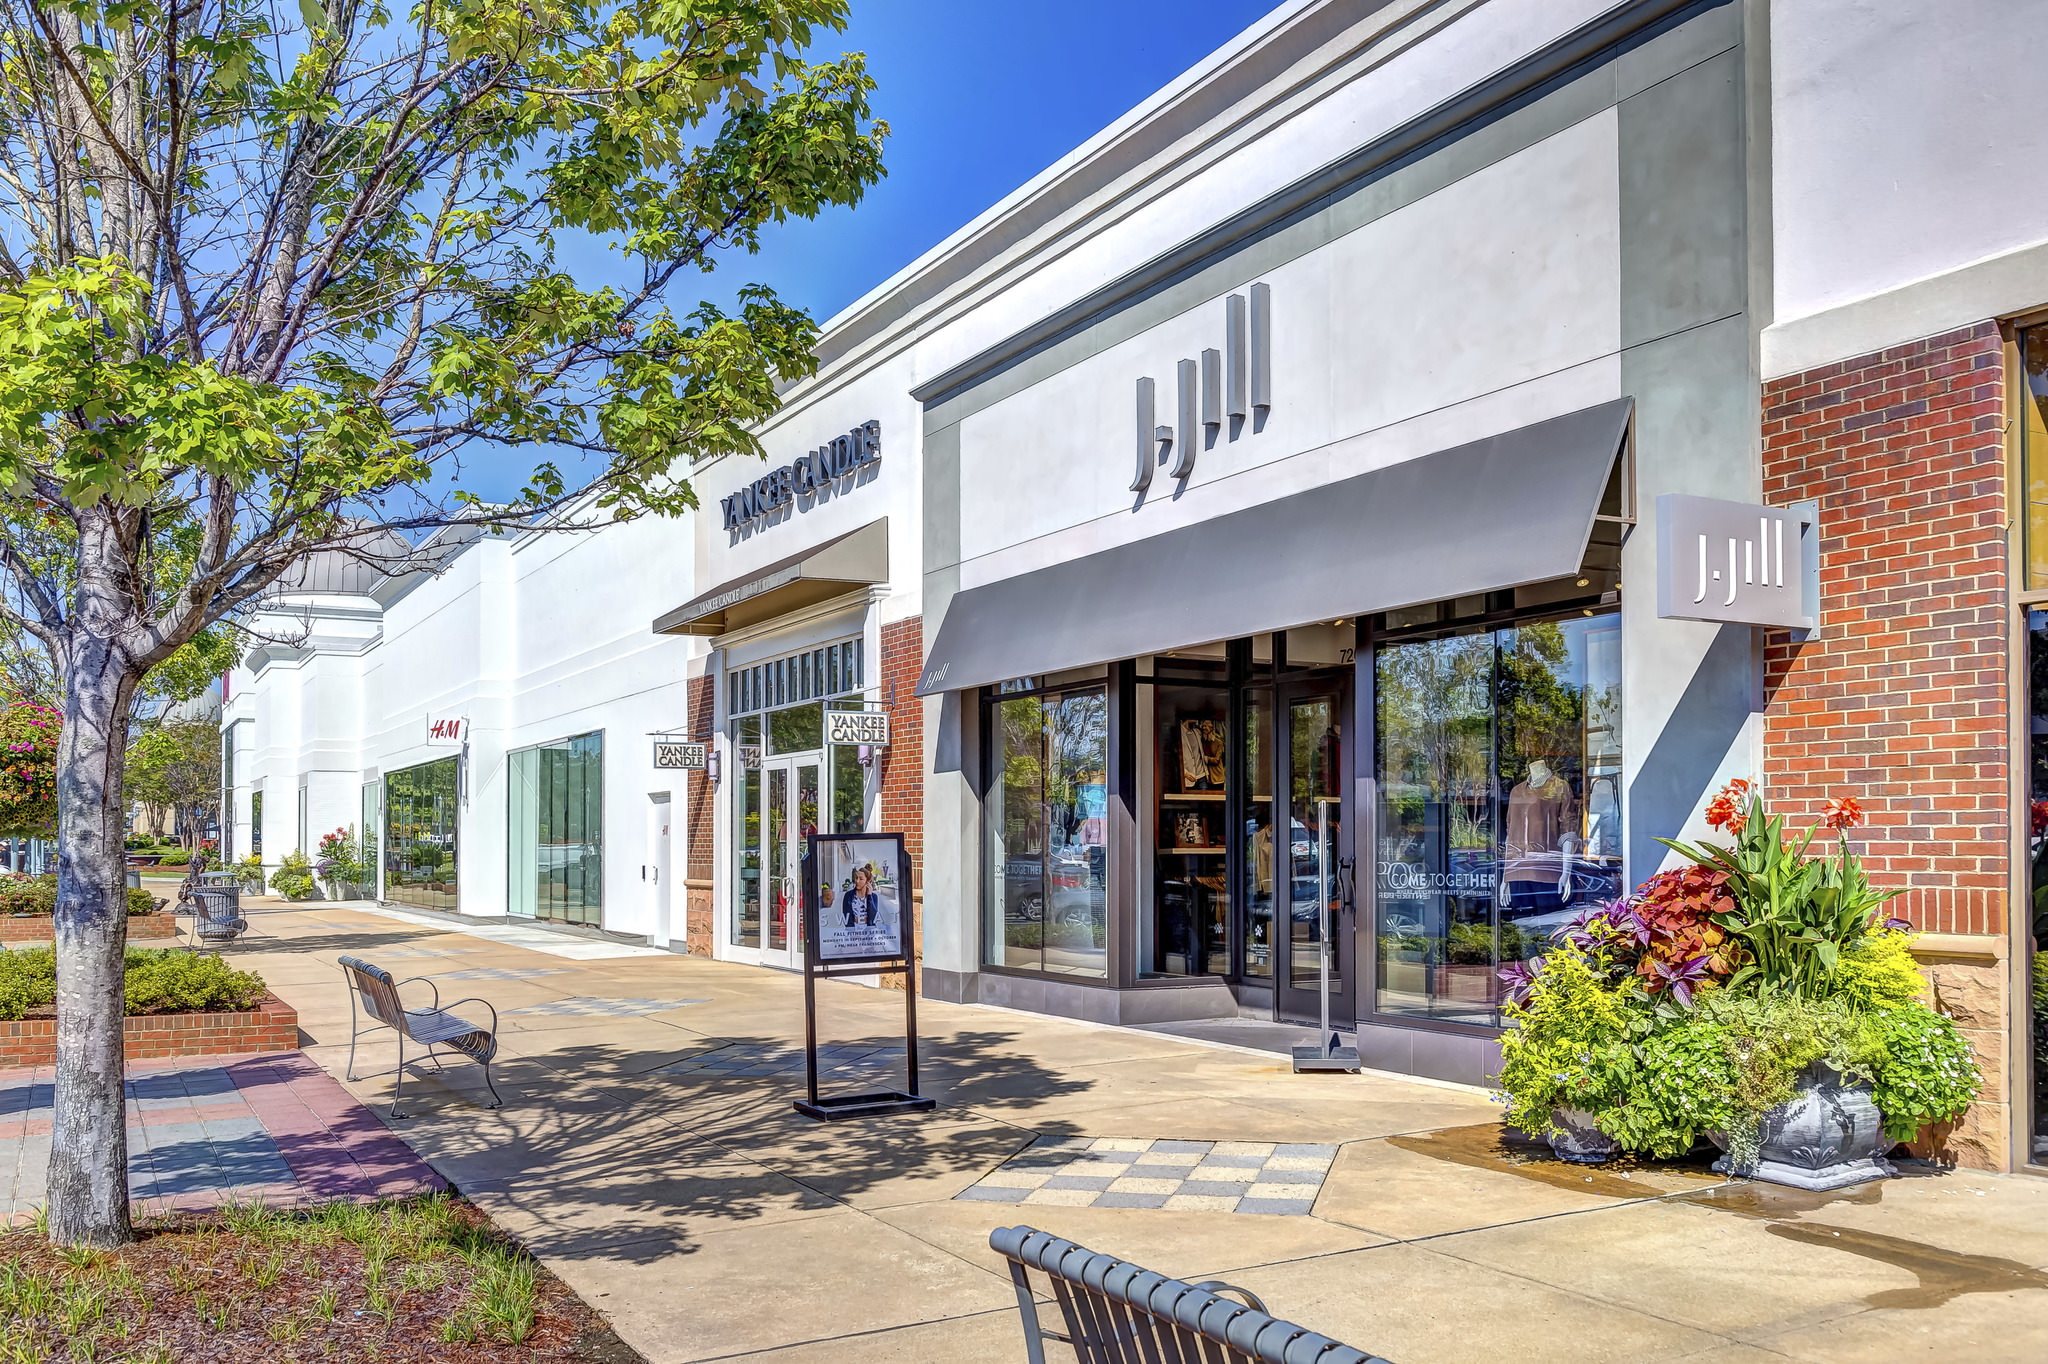 NEW} arrivals in the Dillard's - Shoppes at EastChase